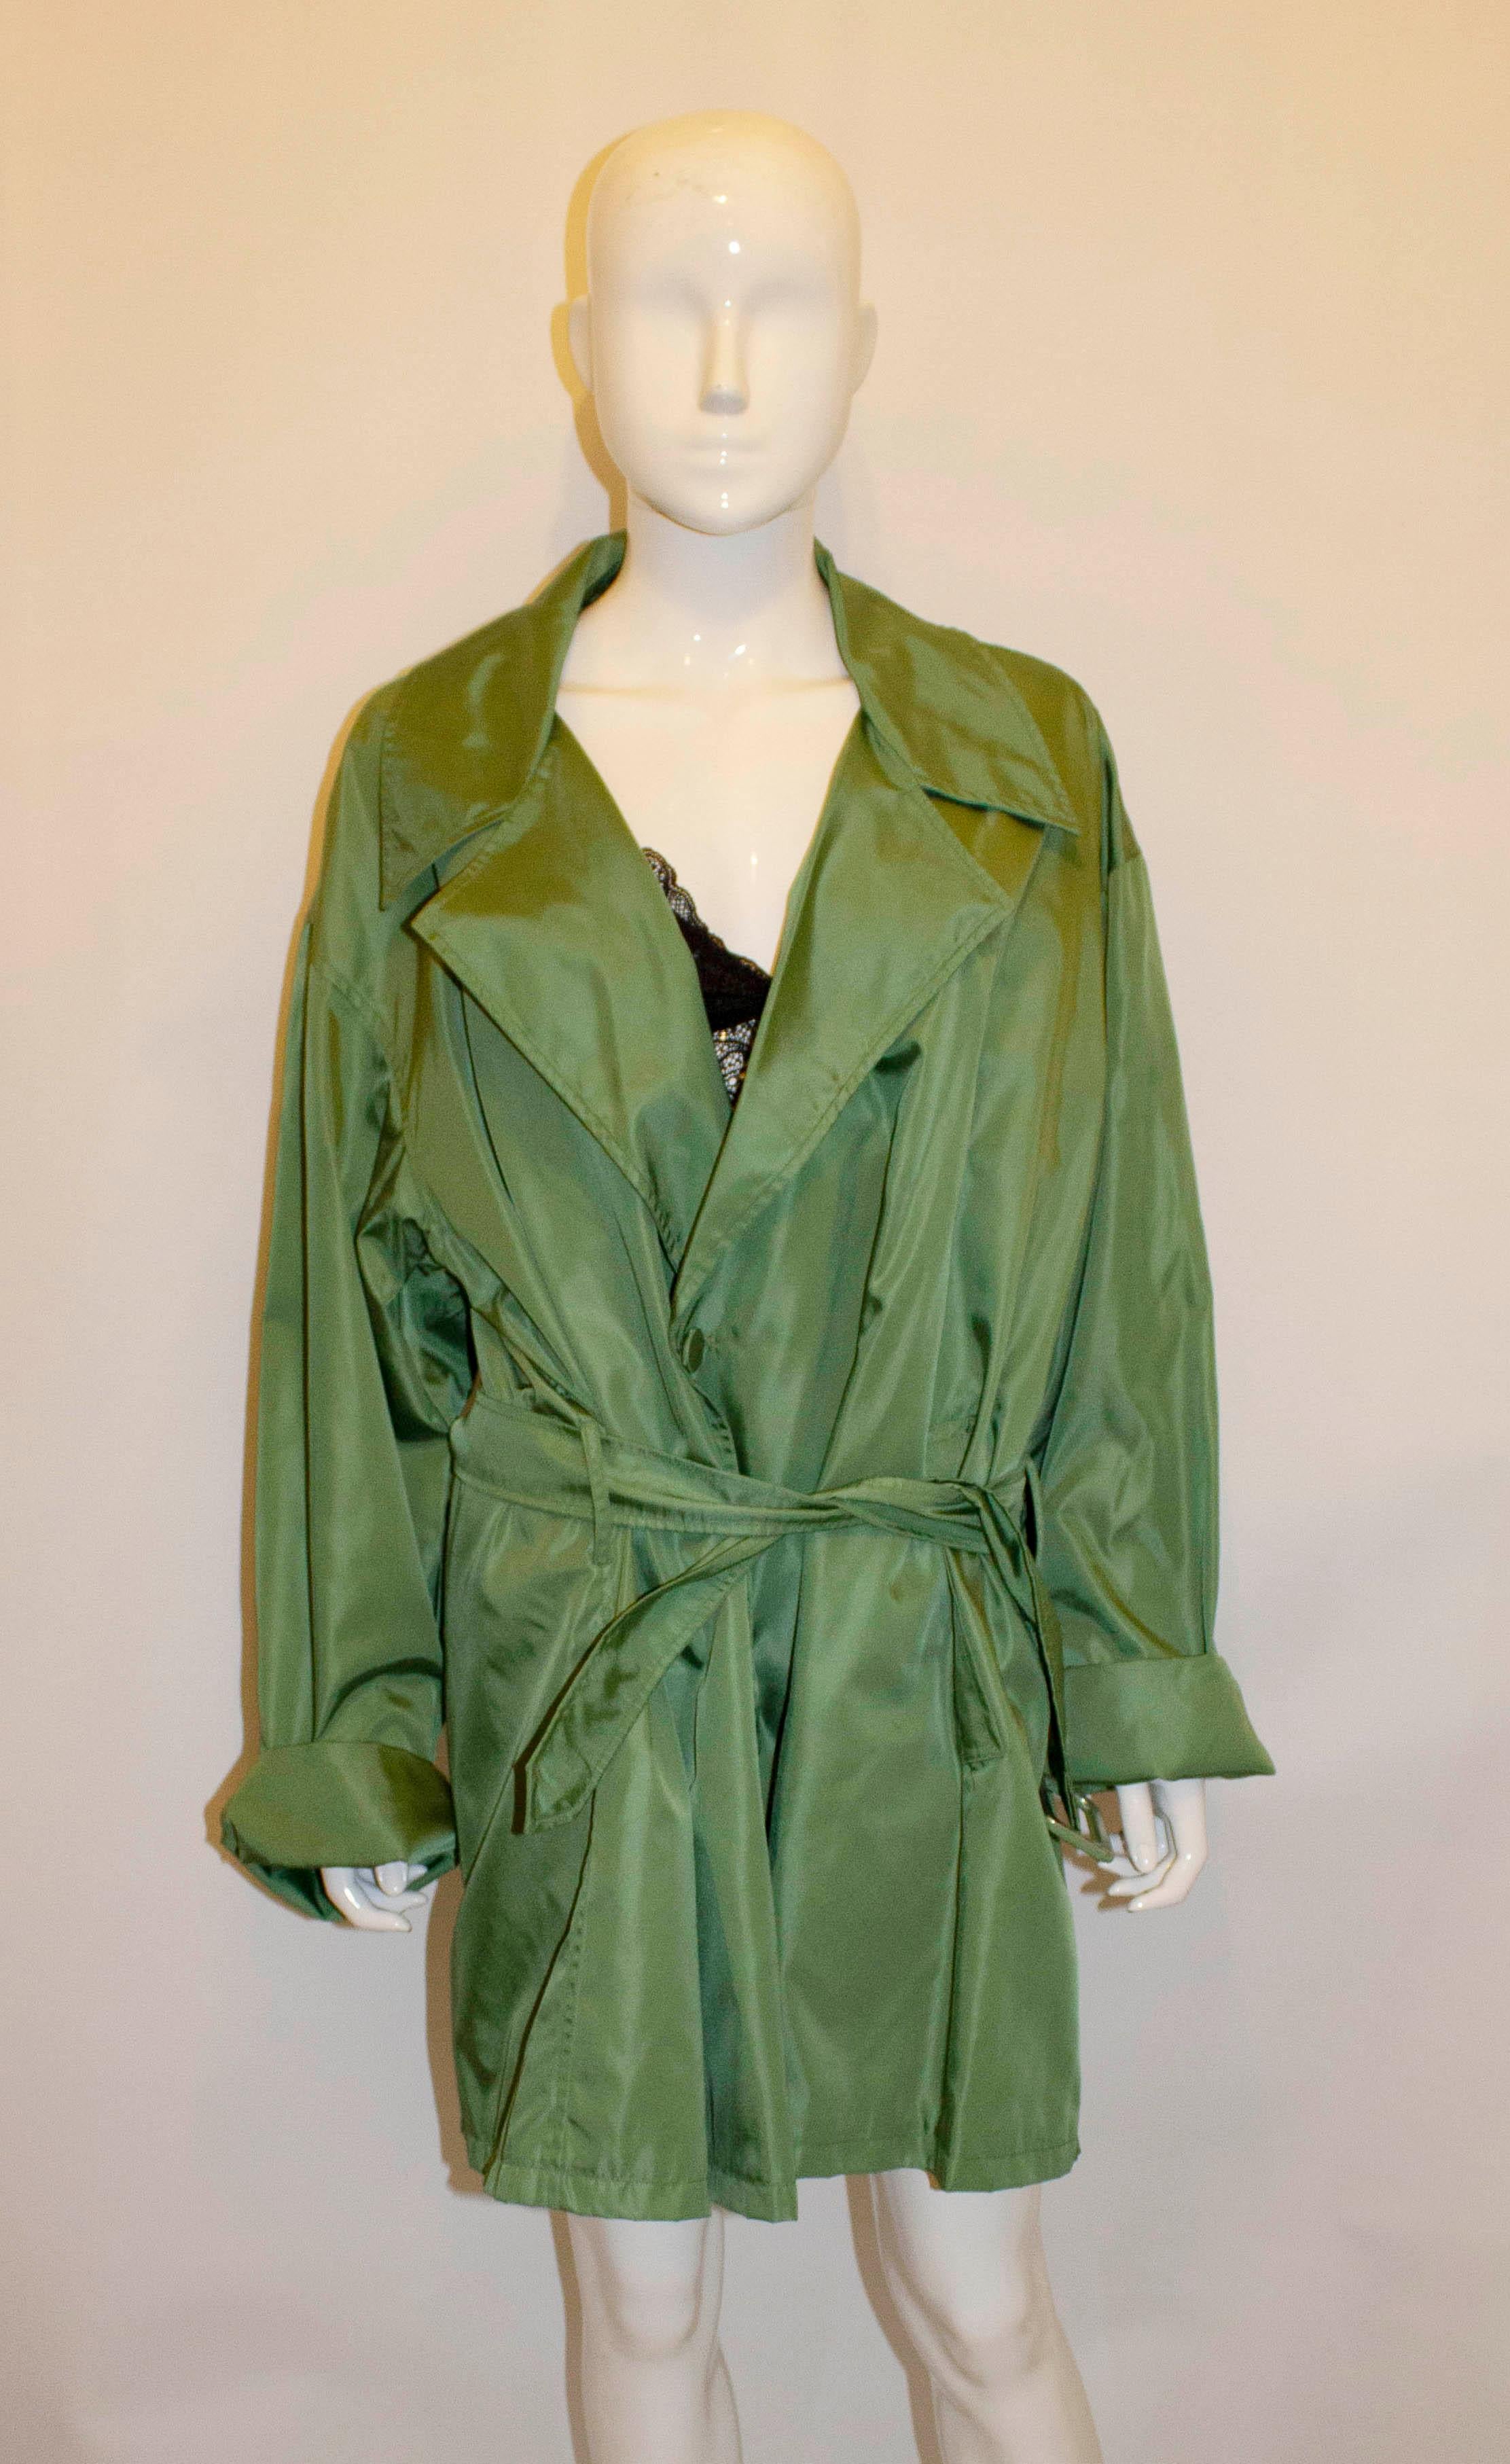 A head turning coat by Prada. In a wonderful grass green colour, the coat has turn back cuffs and  a self fabric belt . It is fully lined, and has never been worn. Size S, and will fit bust up to 46'', but looks better worn loose, length 34''